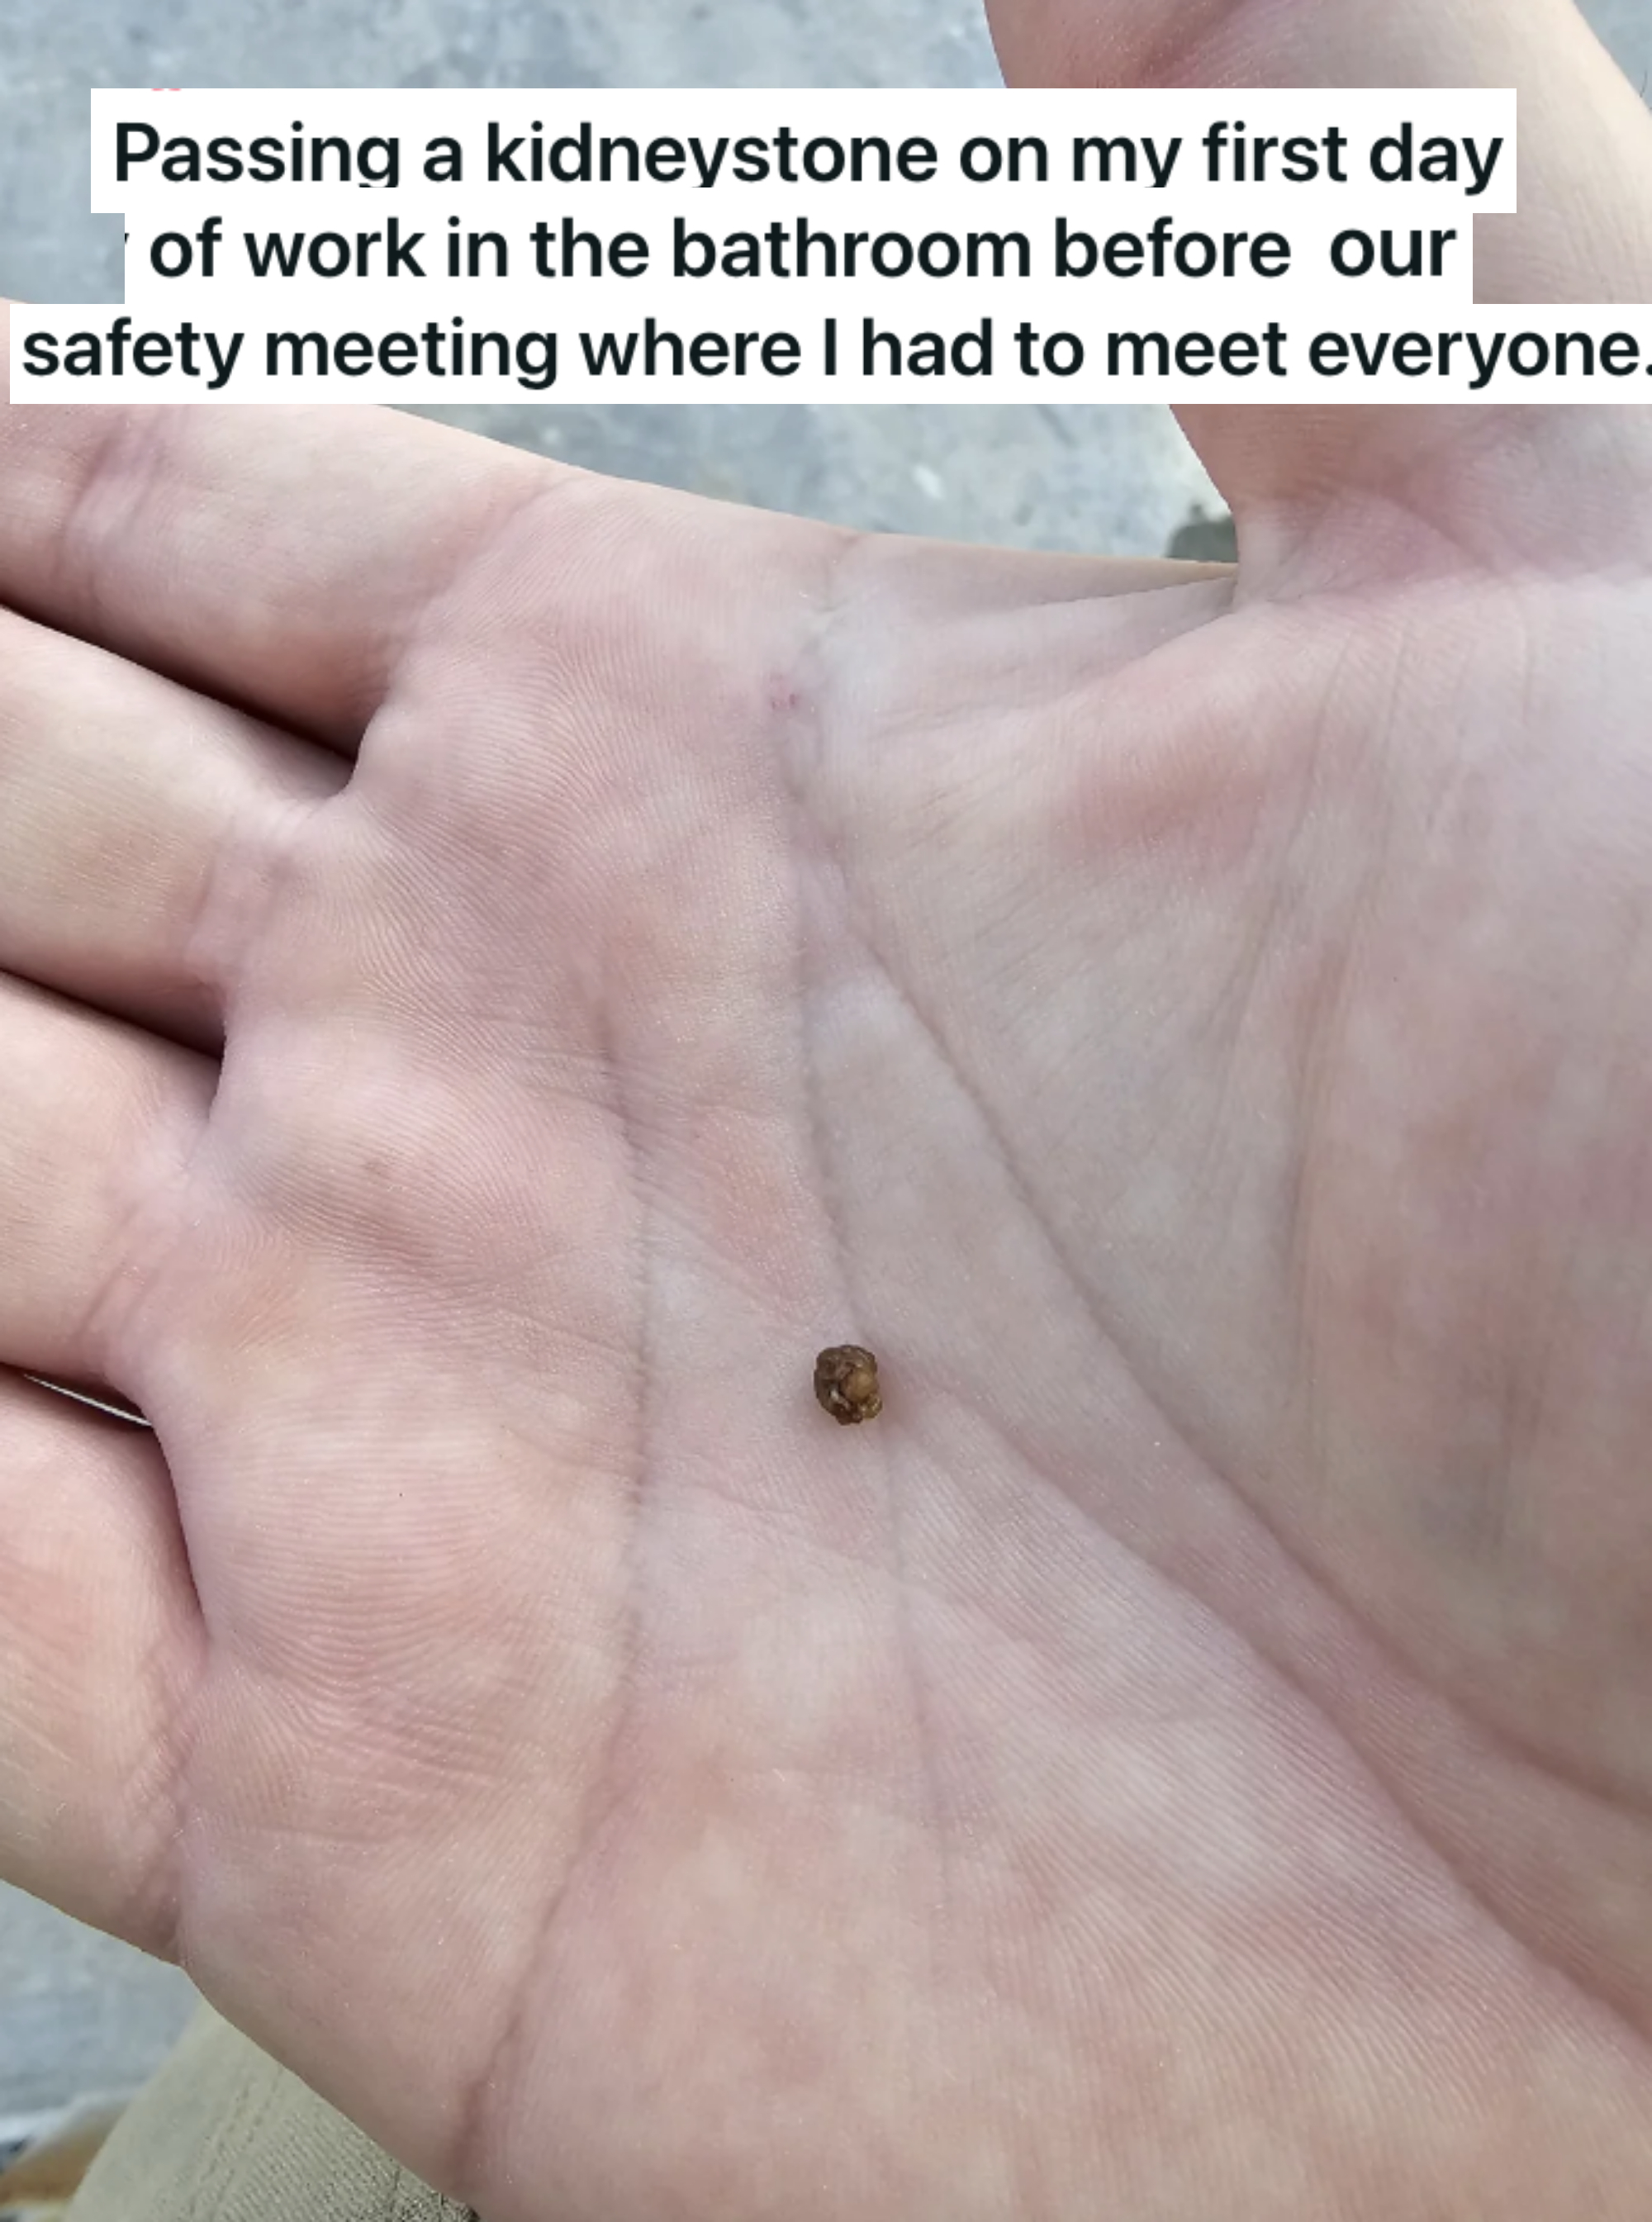 &quot;Passing a kidney stone on my first day...&quot;